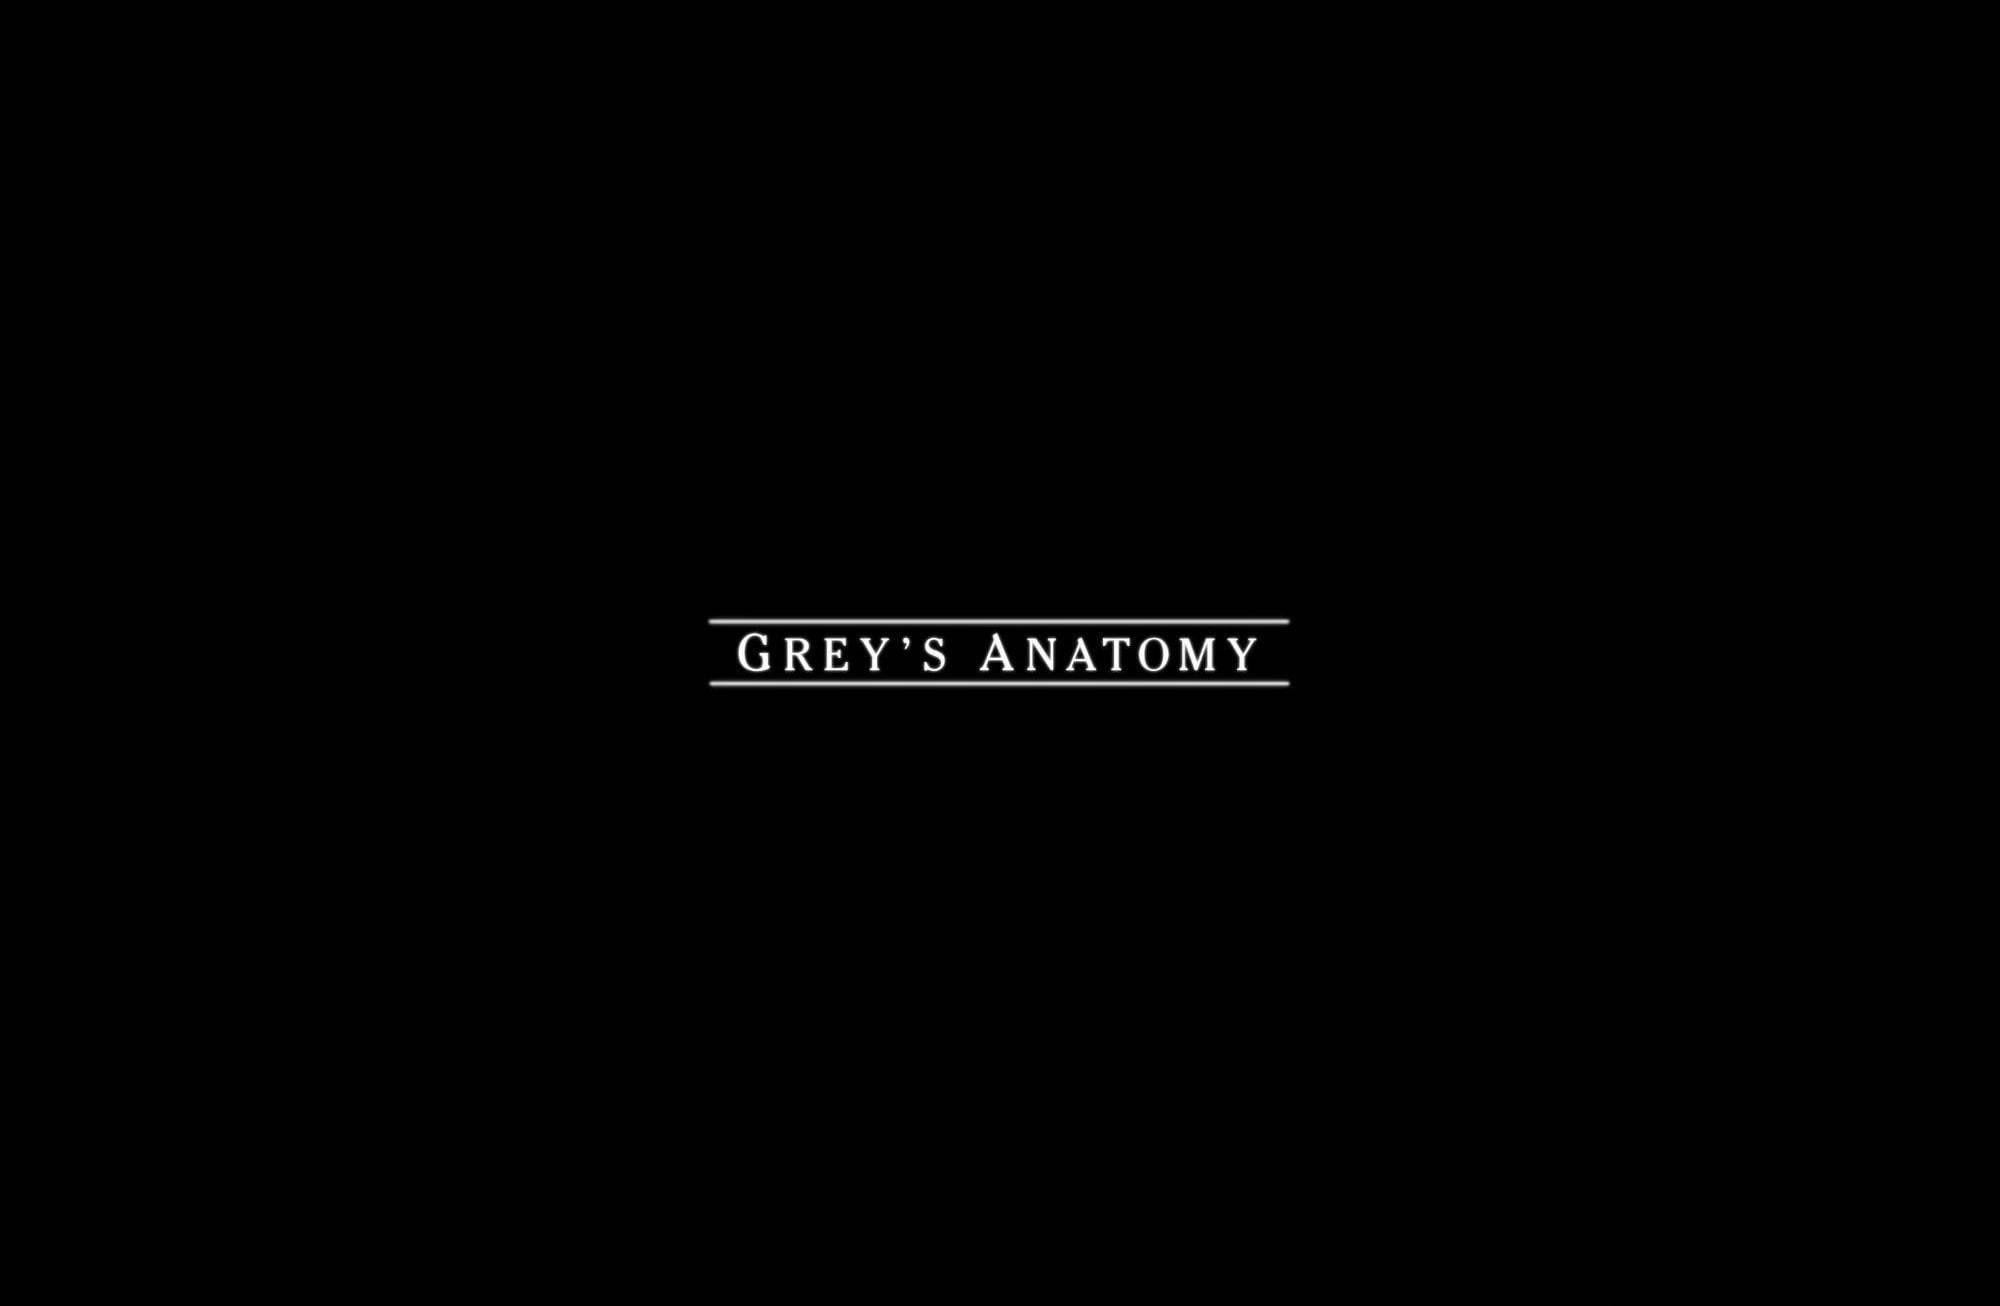 Download Grey's Anatomy Opening Title Wallpaper